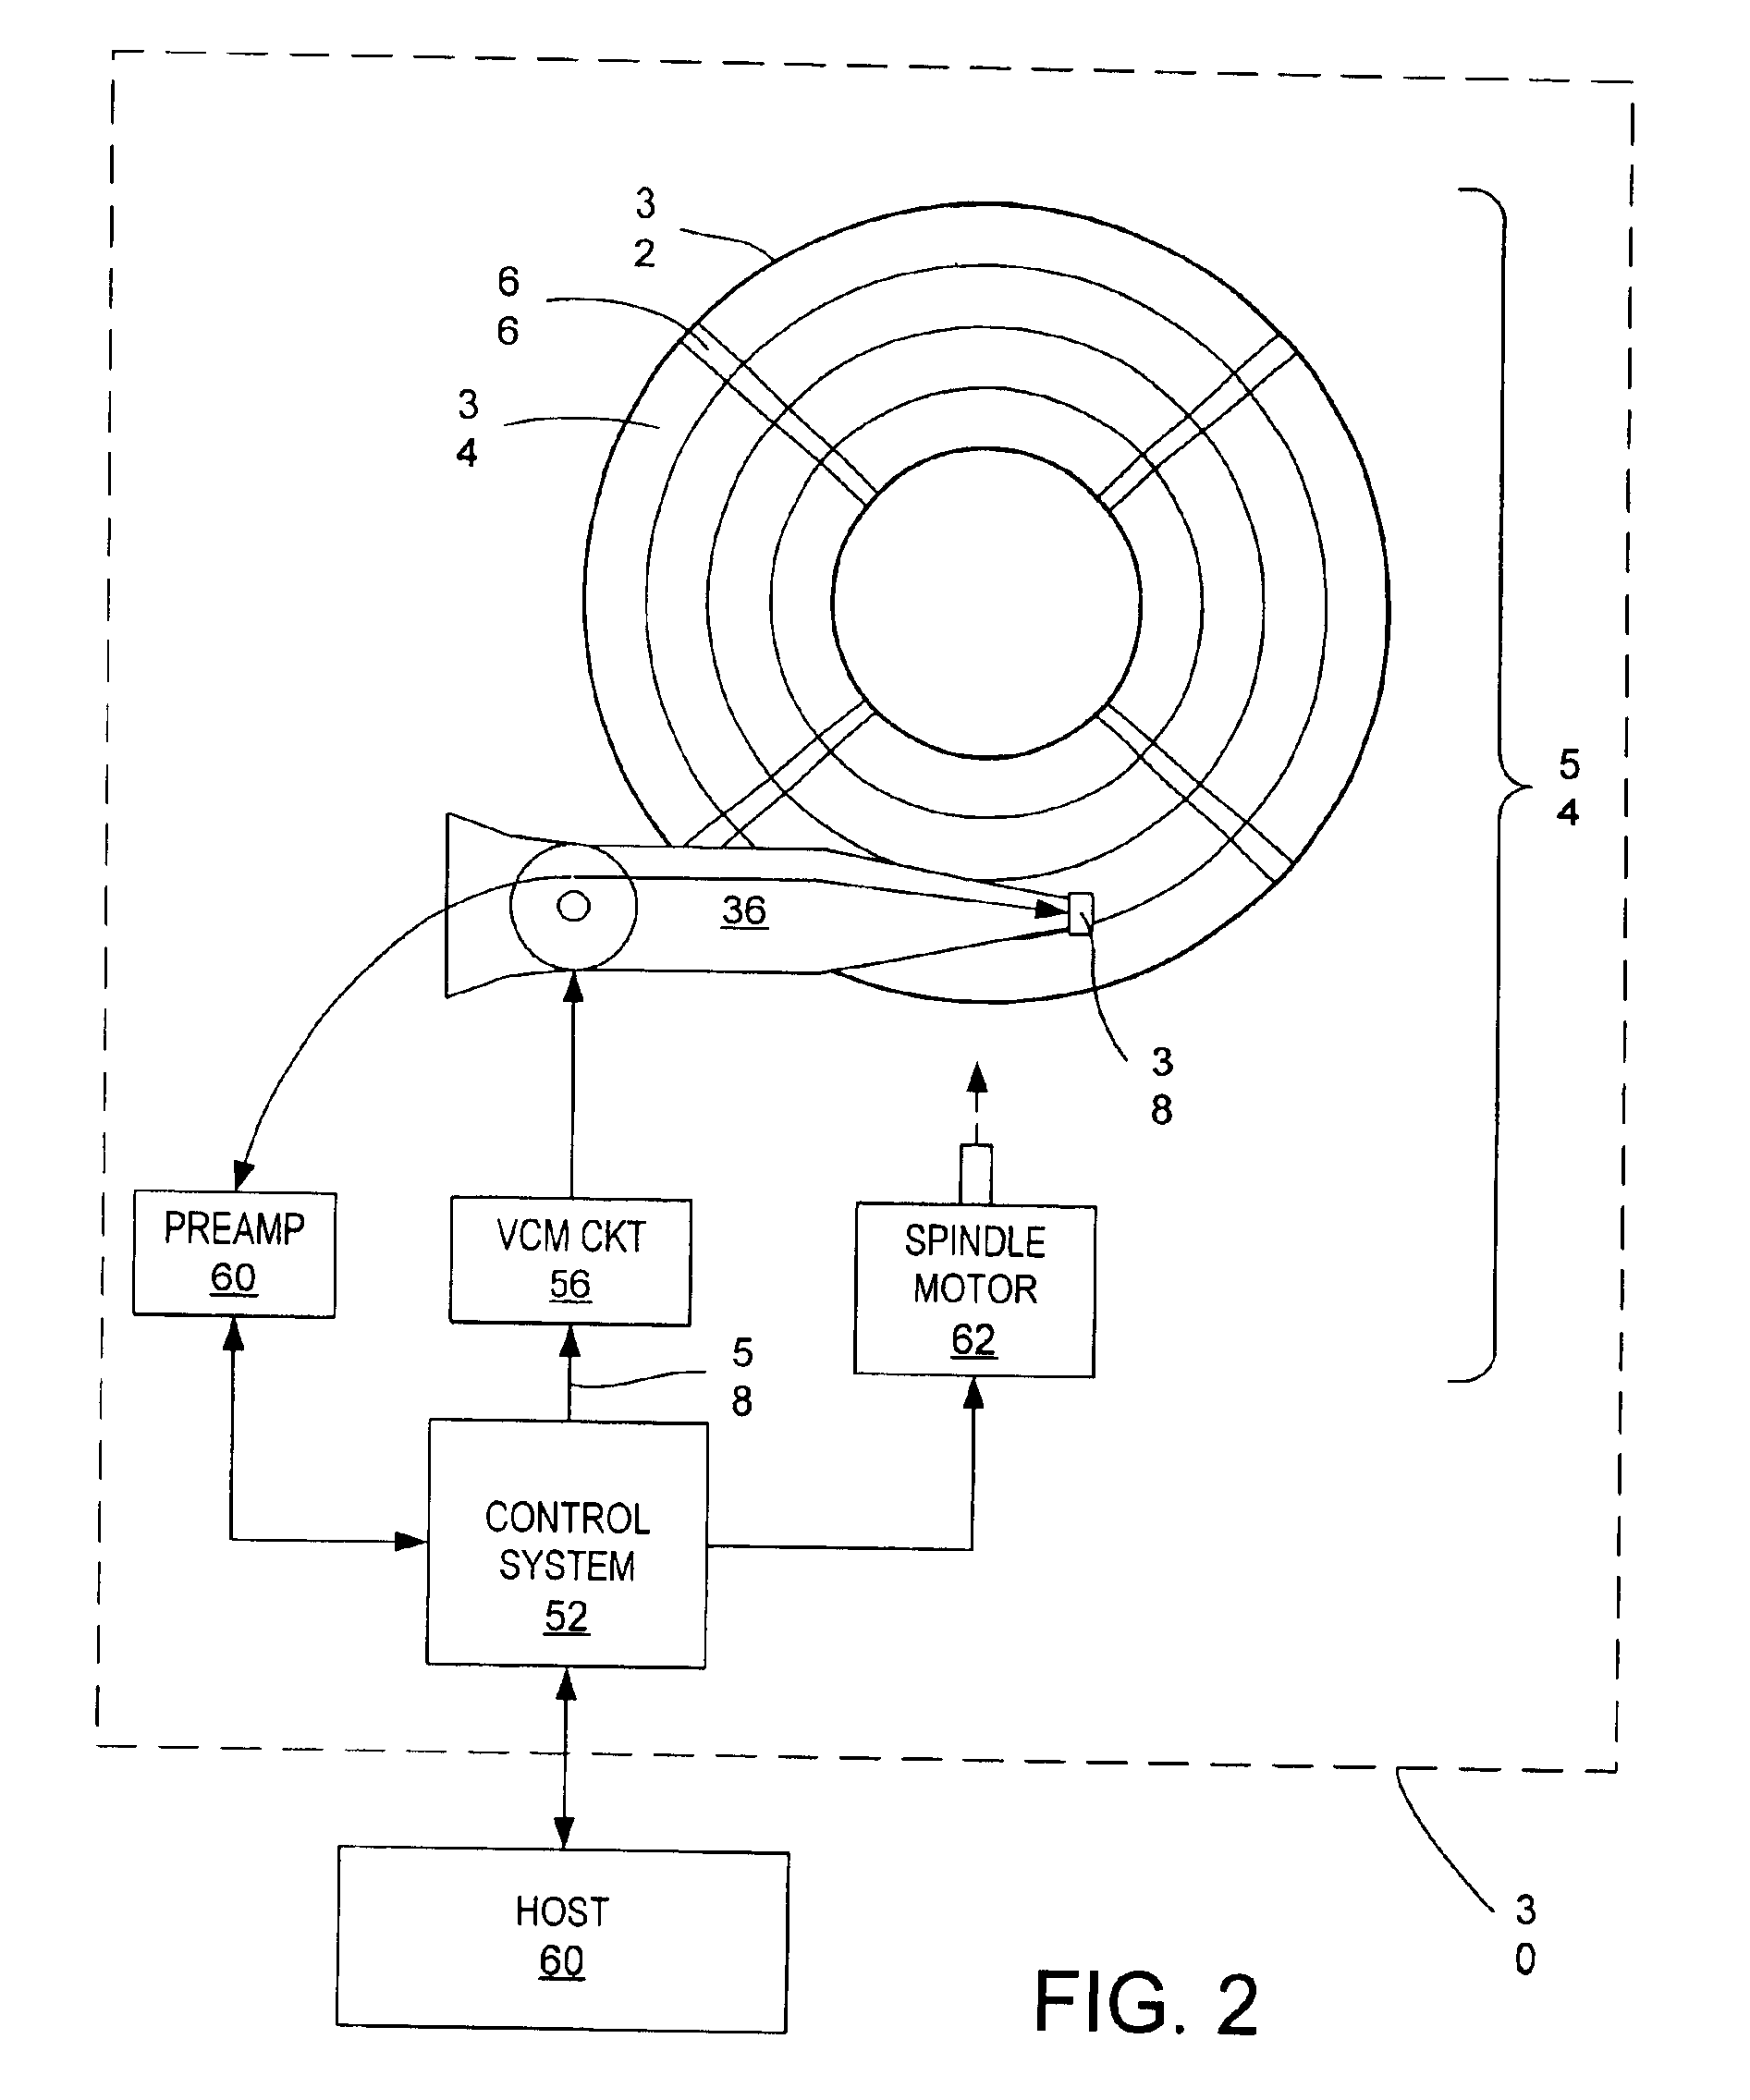 Method and disk drive for improving head position accuracy during track following through real-time identification of external vibration and monitoring of write-unsafe occurrences